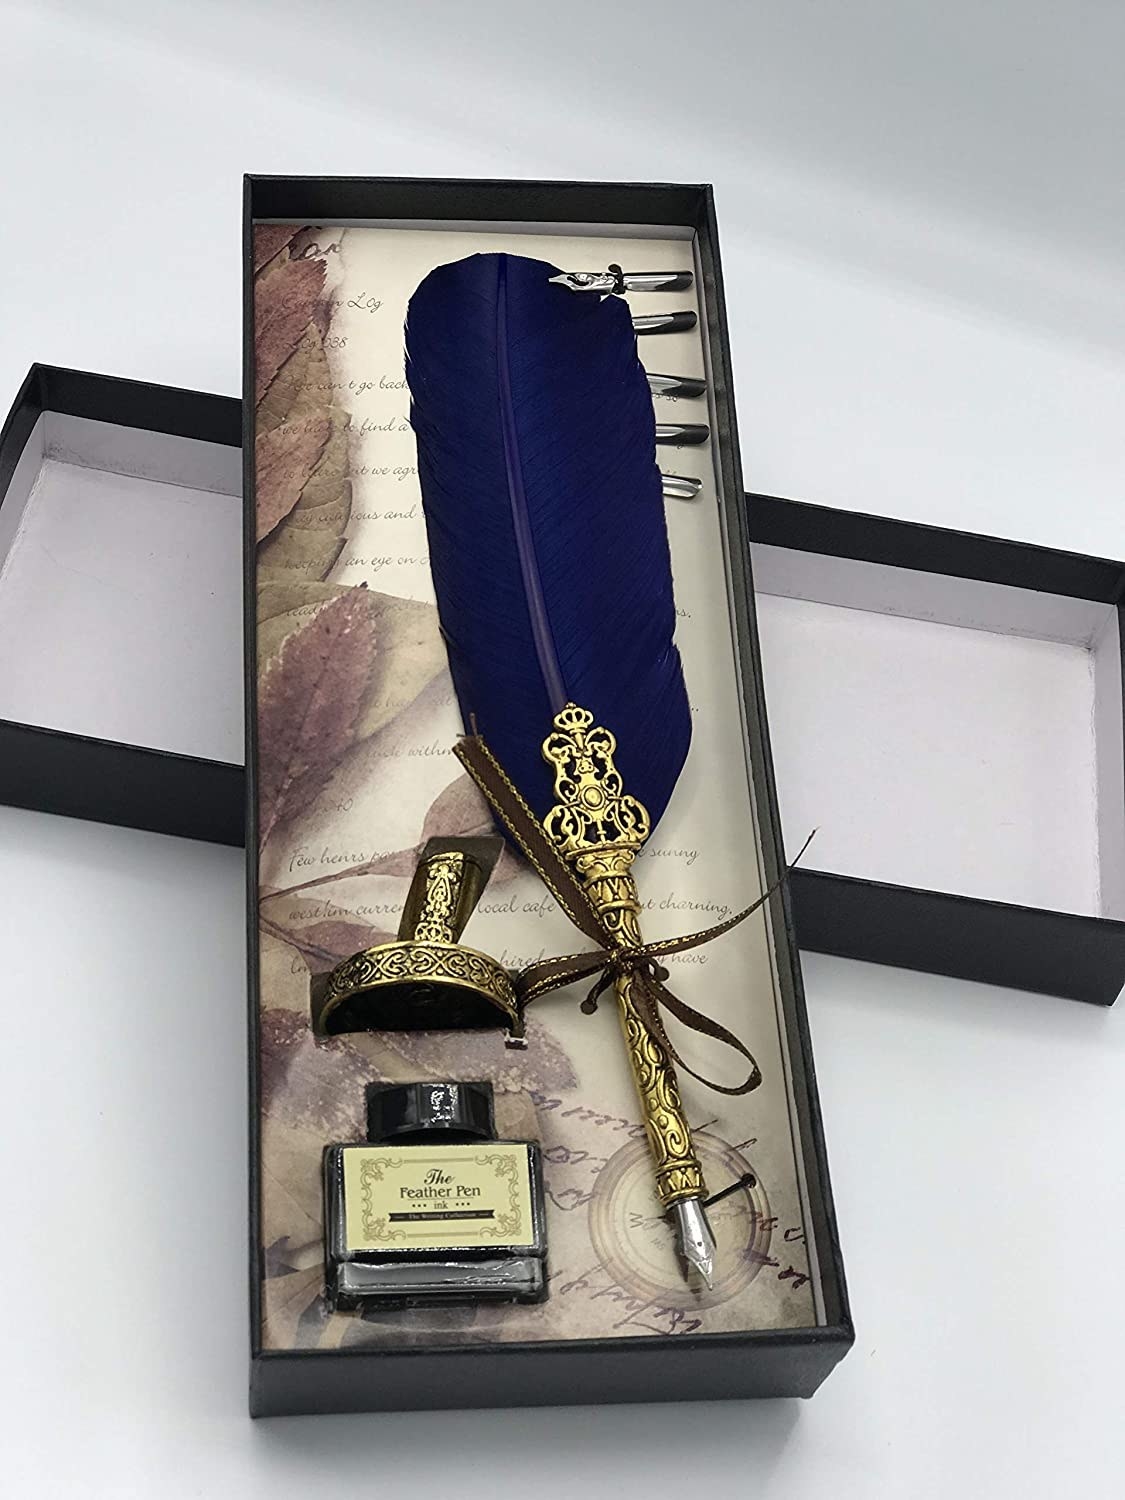 The quill has a navy blue feather extension and gold plating with intricate detail leading up to the nib.